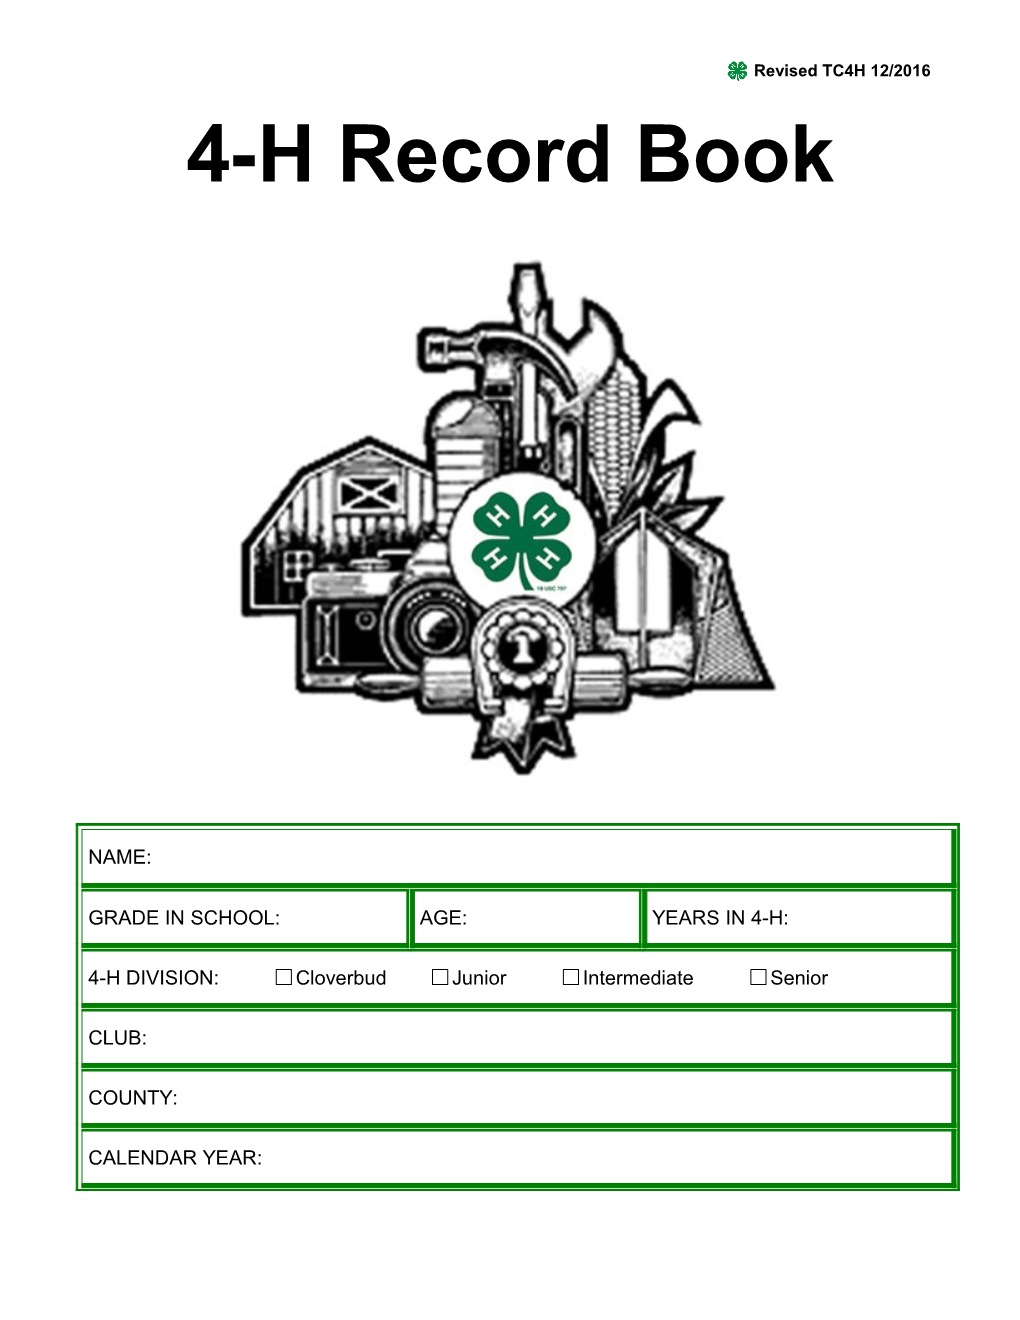 Use This Record Book for All the Things You Do in 4-H This Year